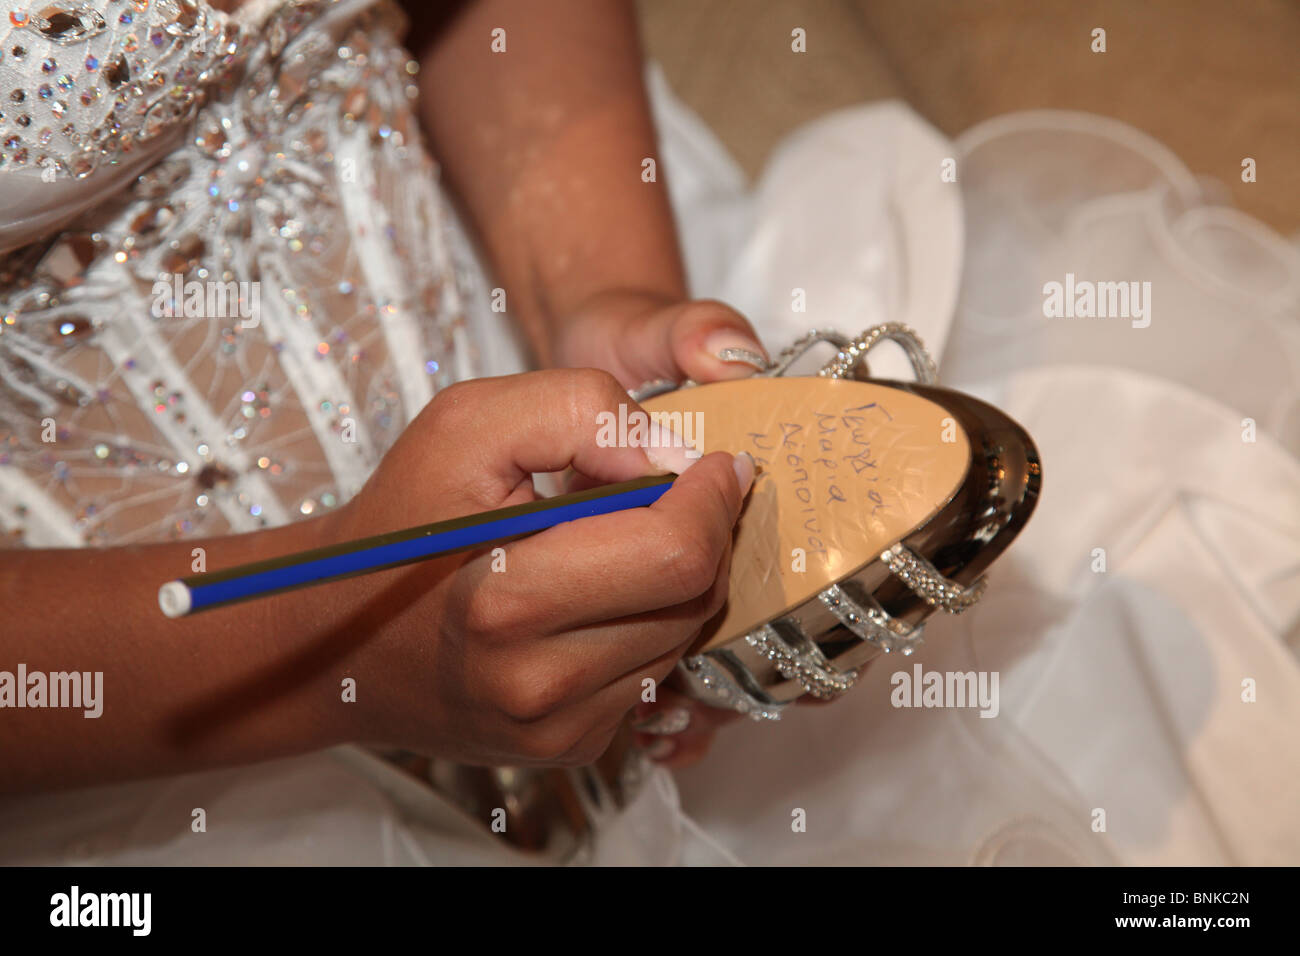 Jimmy Choo white wedding shoes for a bride Stock Photo - Alamy